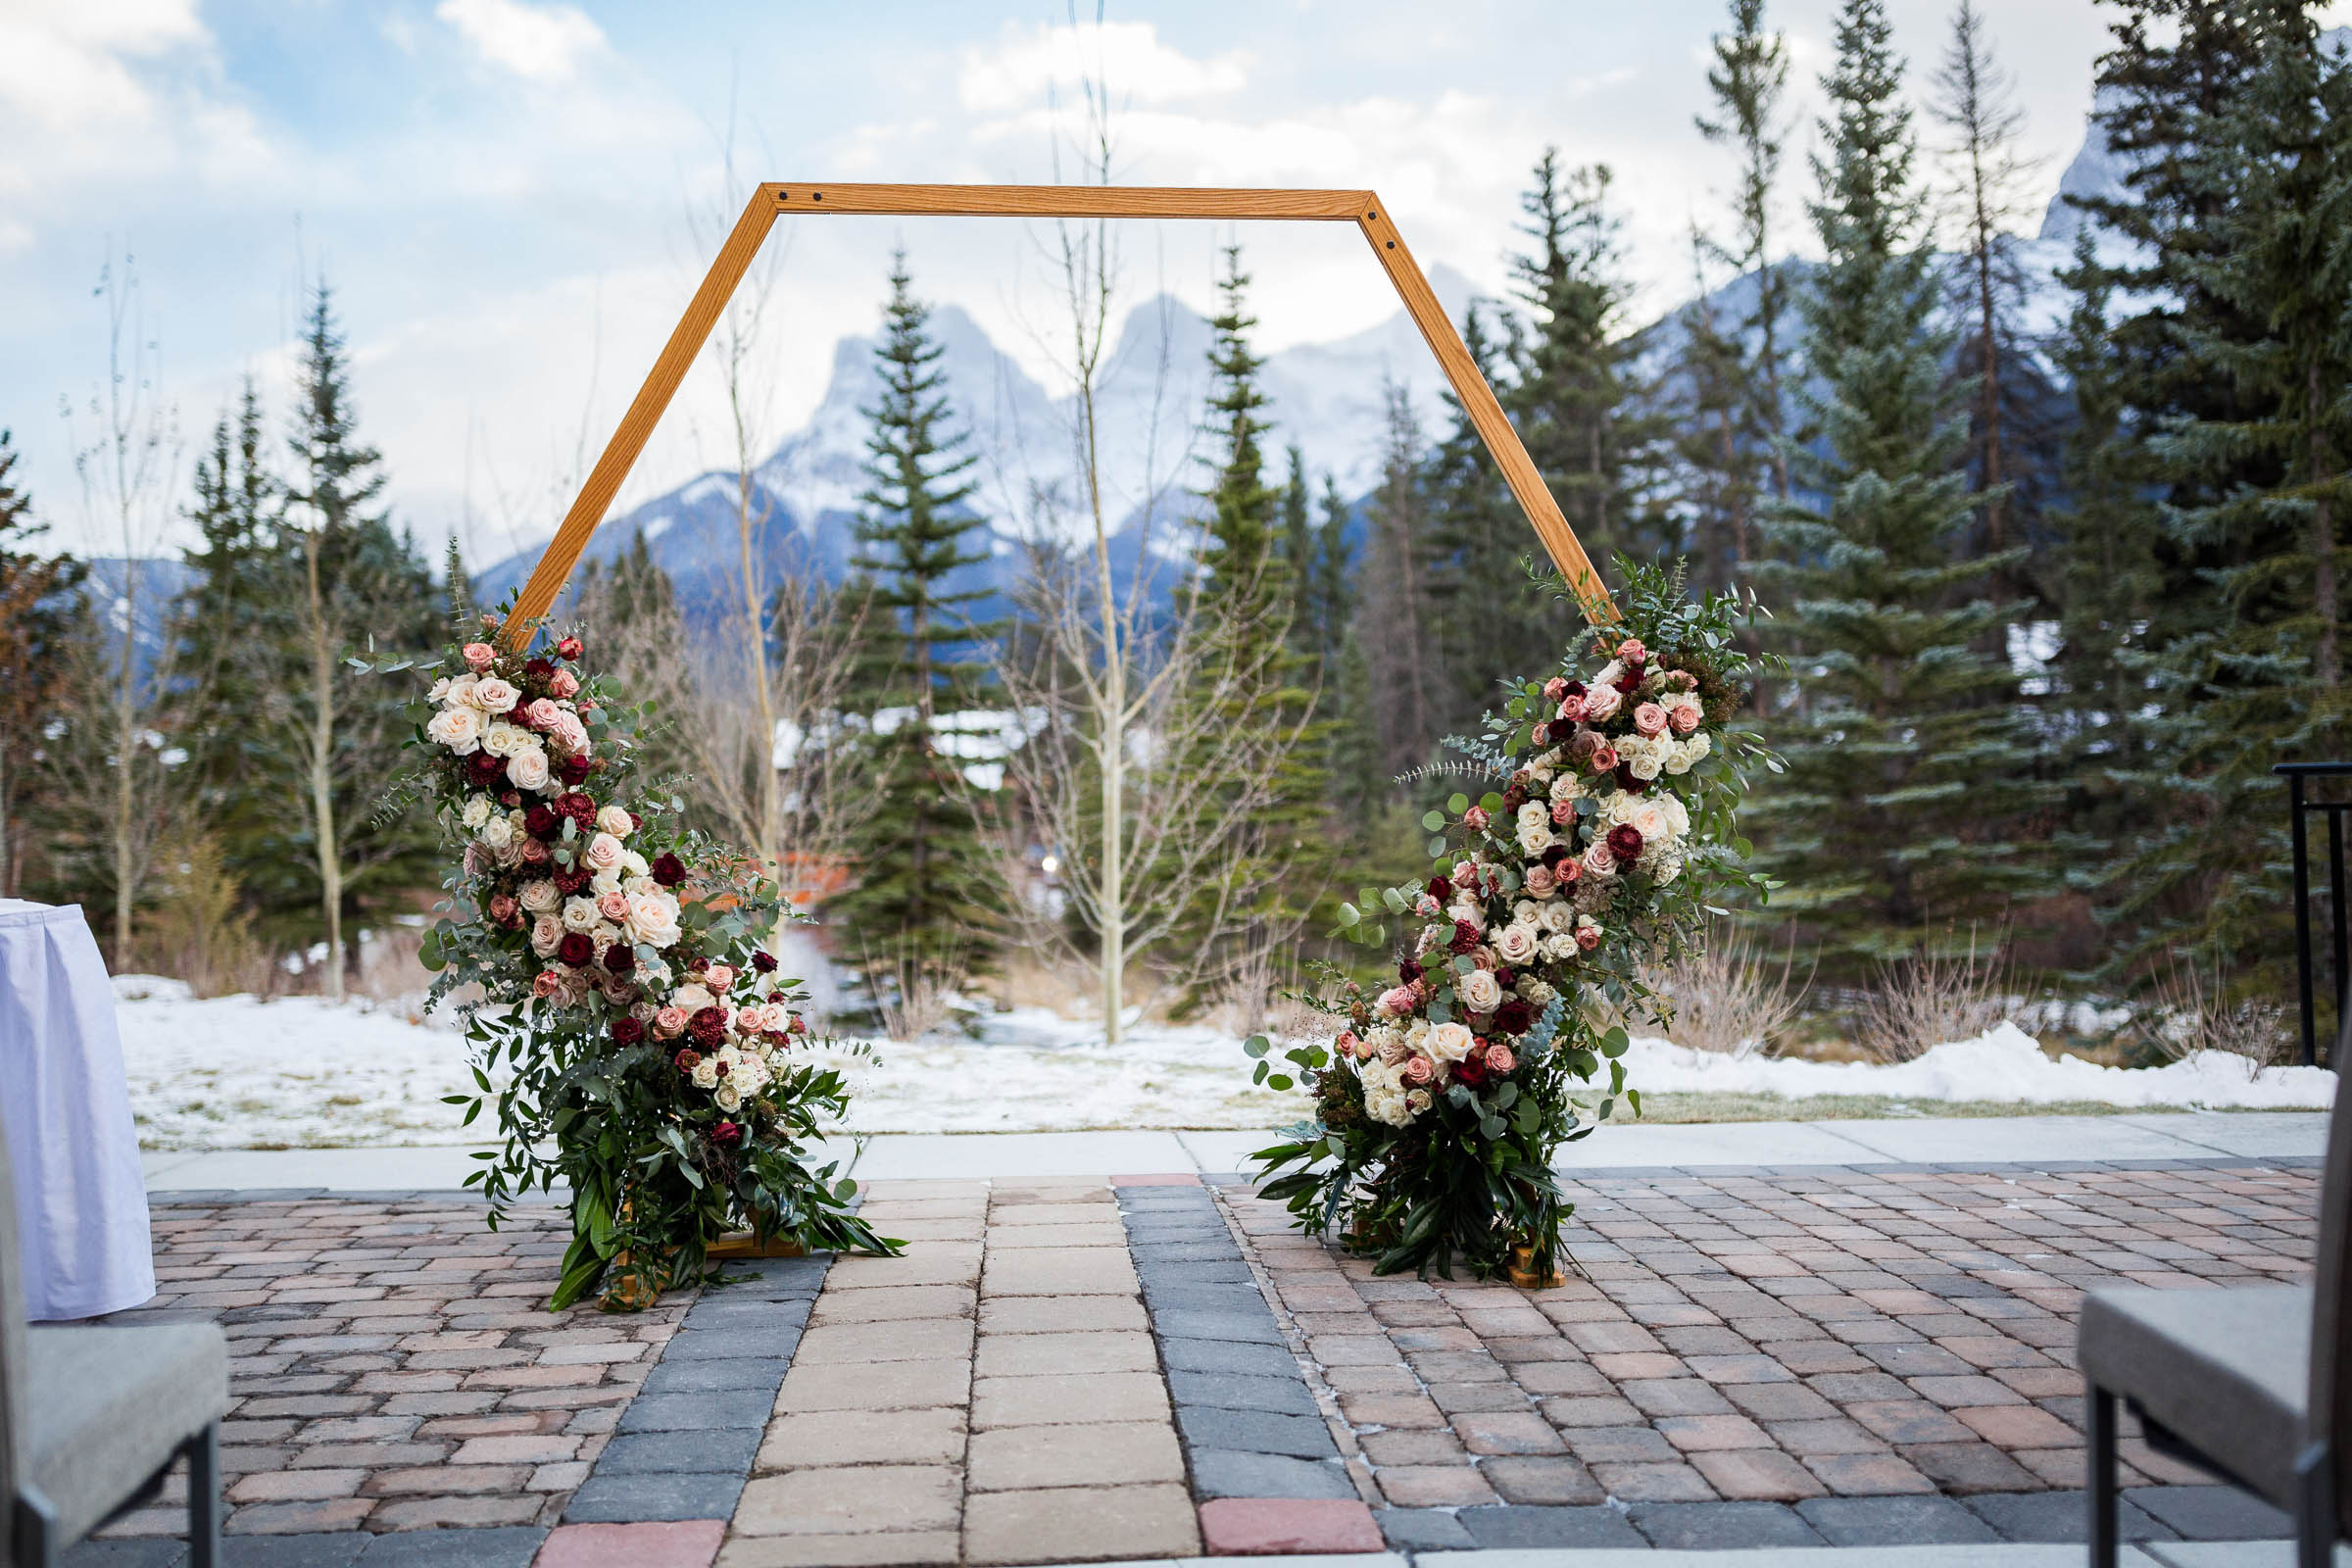 Geometric wedding ceremony backdrop with flowers cascading from the bottom up